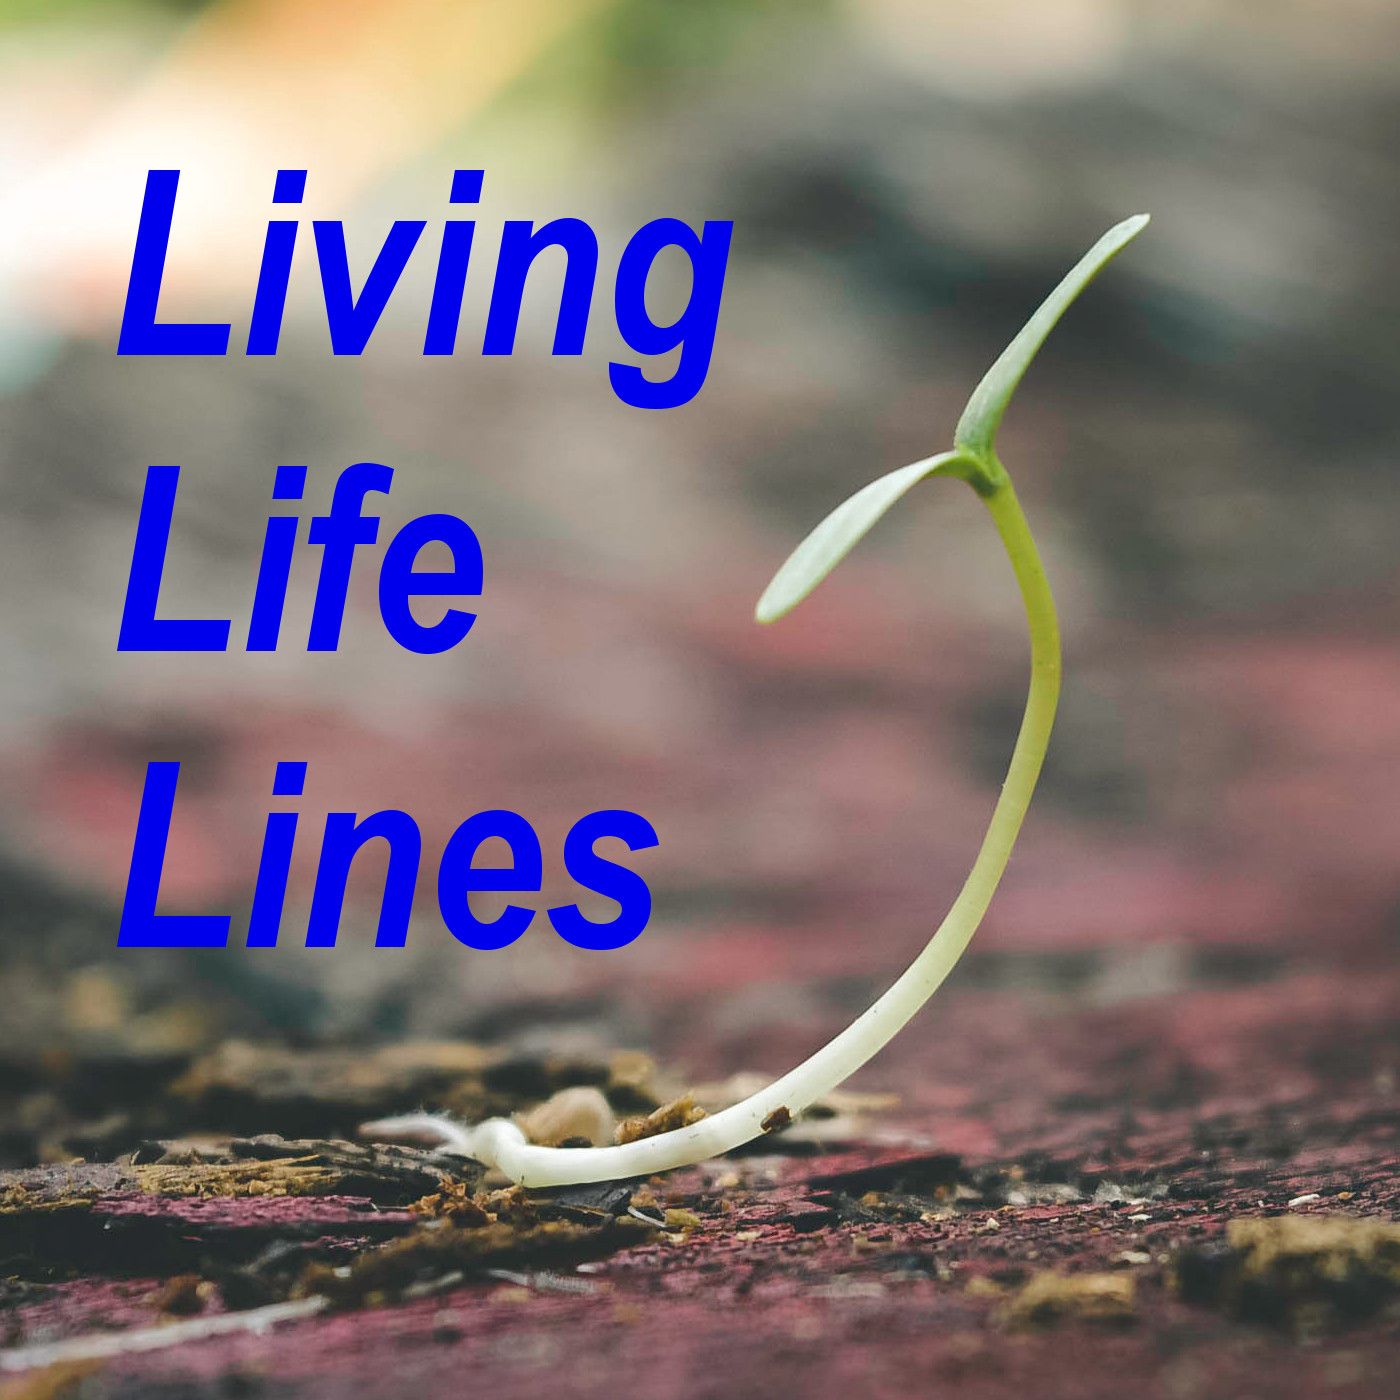 Living Life Lines